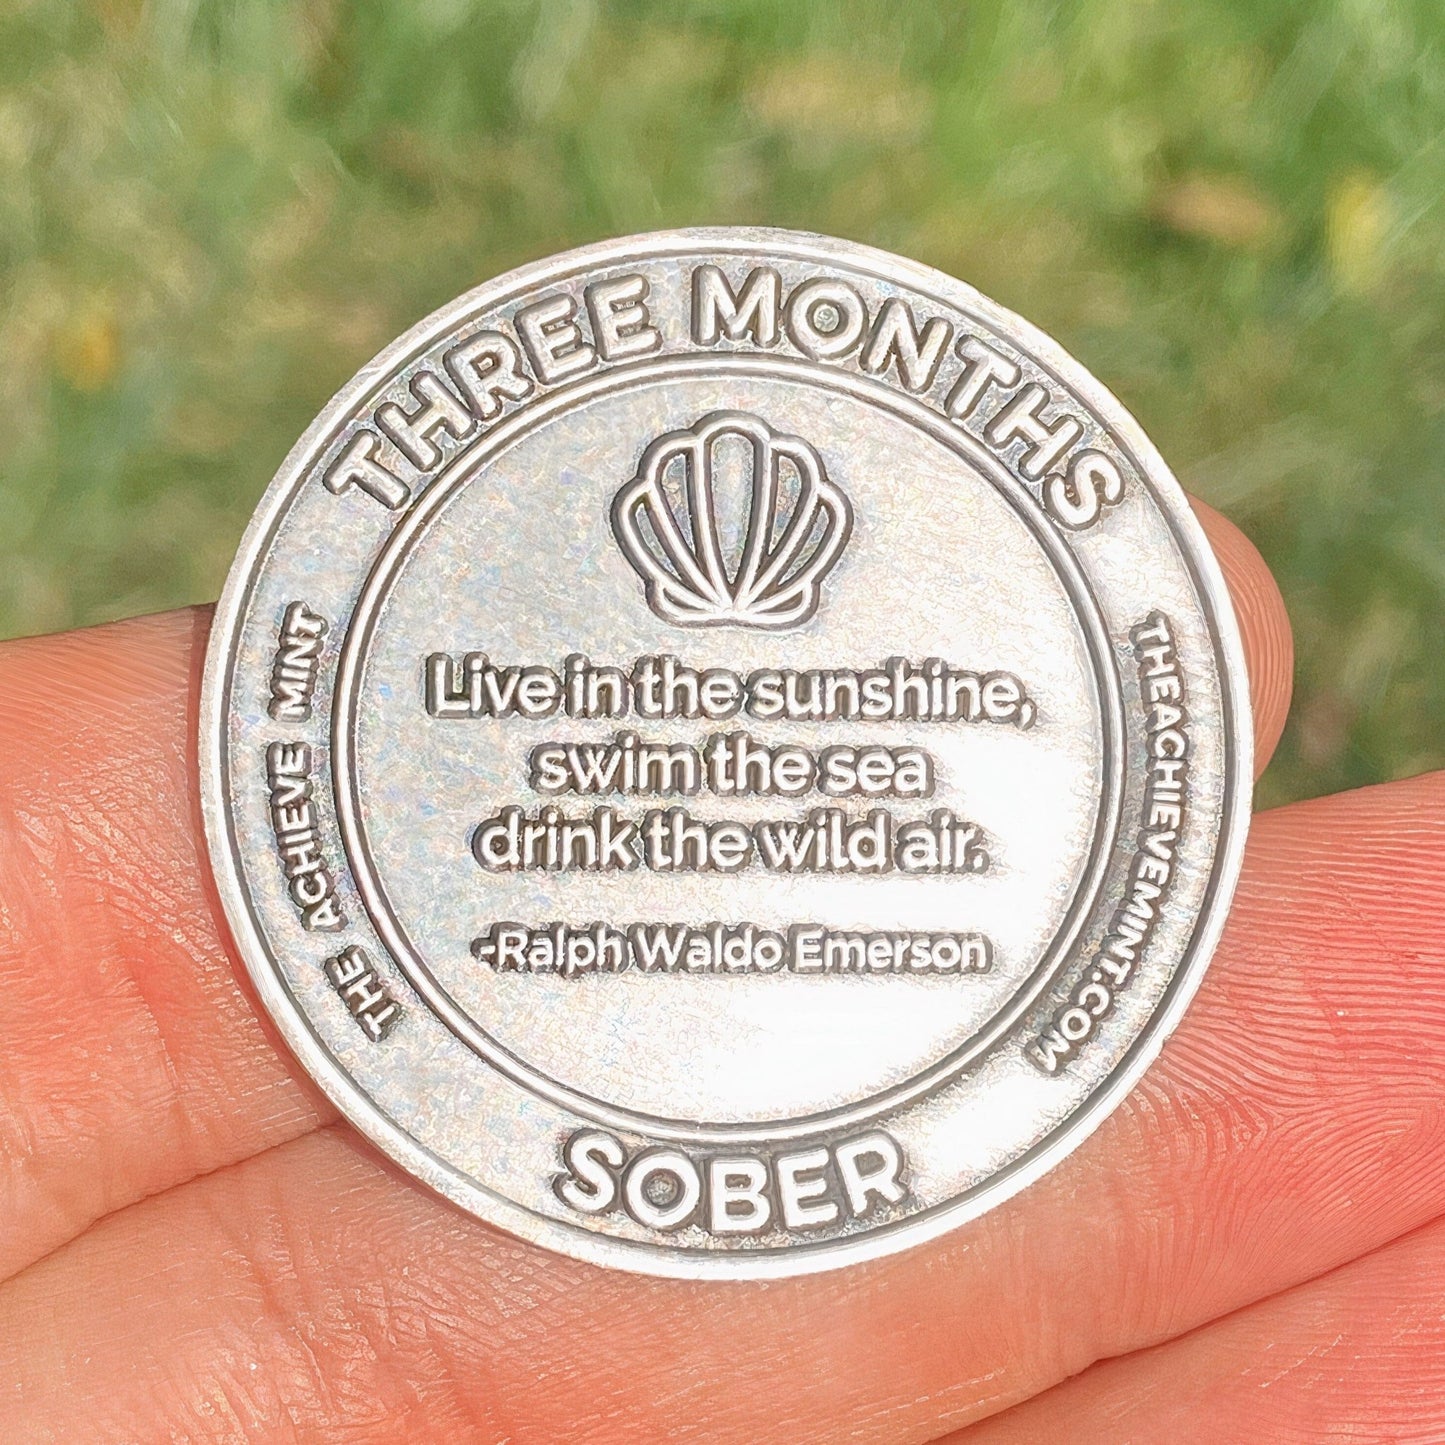 Three Months Sober sobriety coin - The Achieve Mint